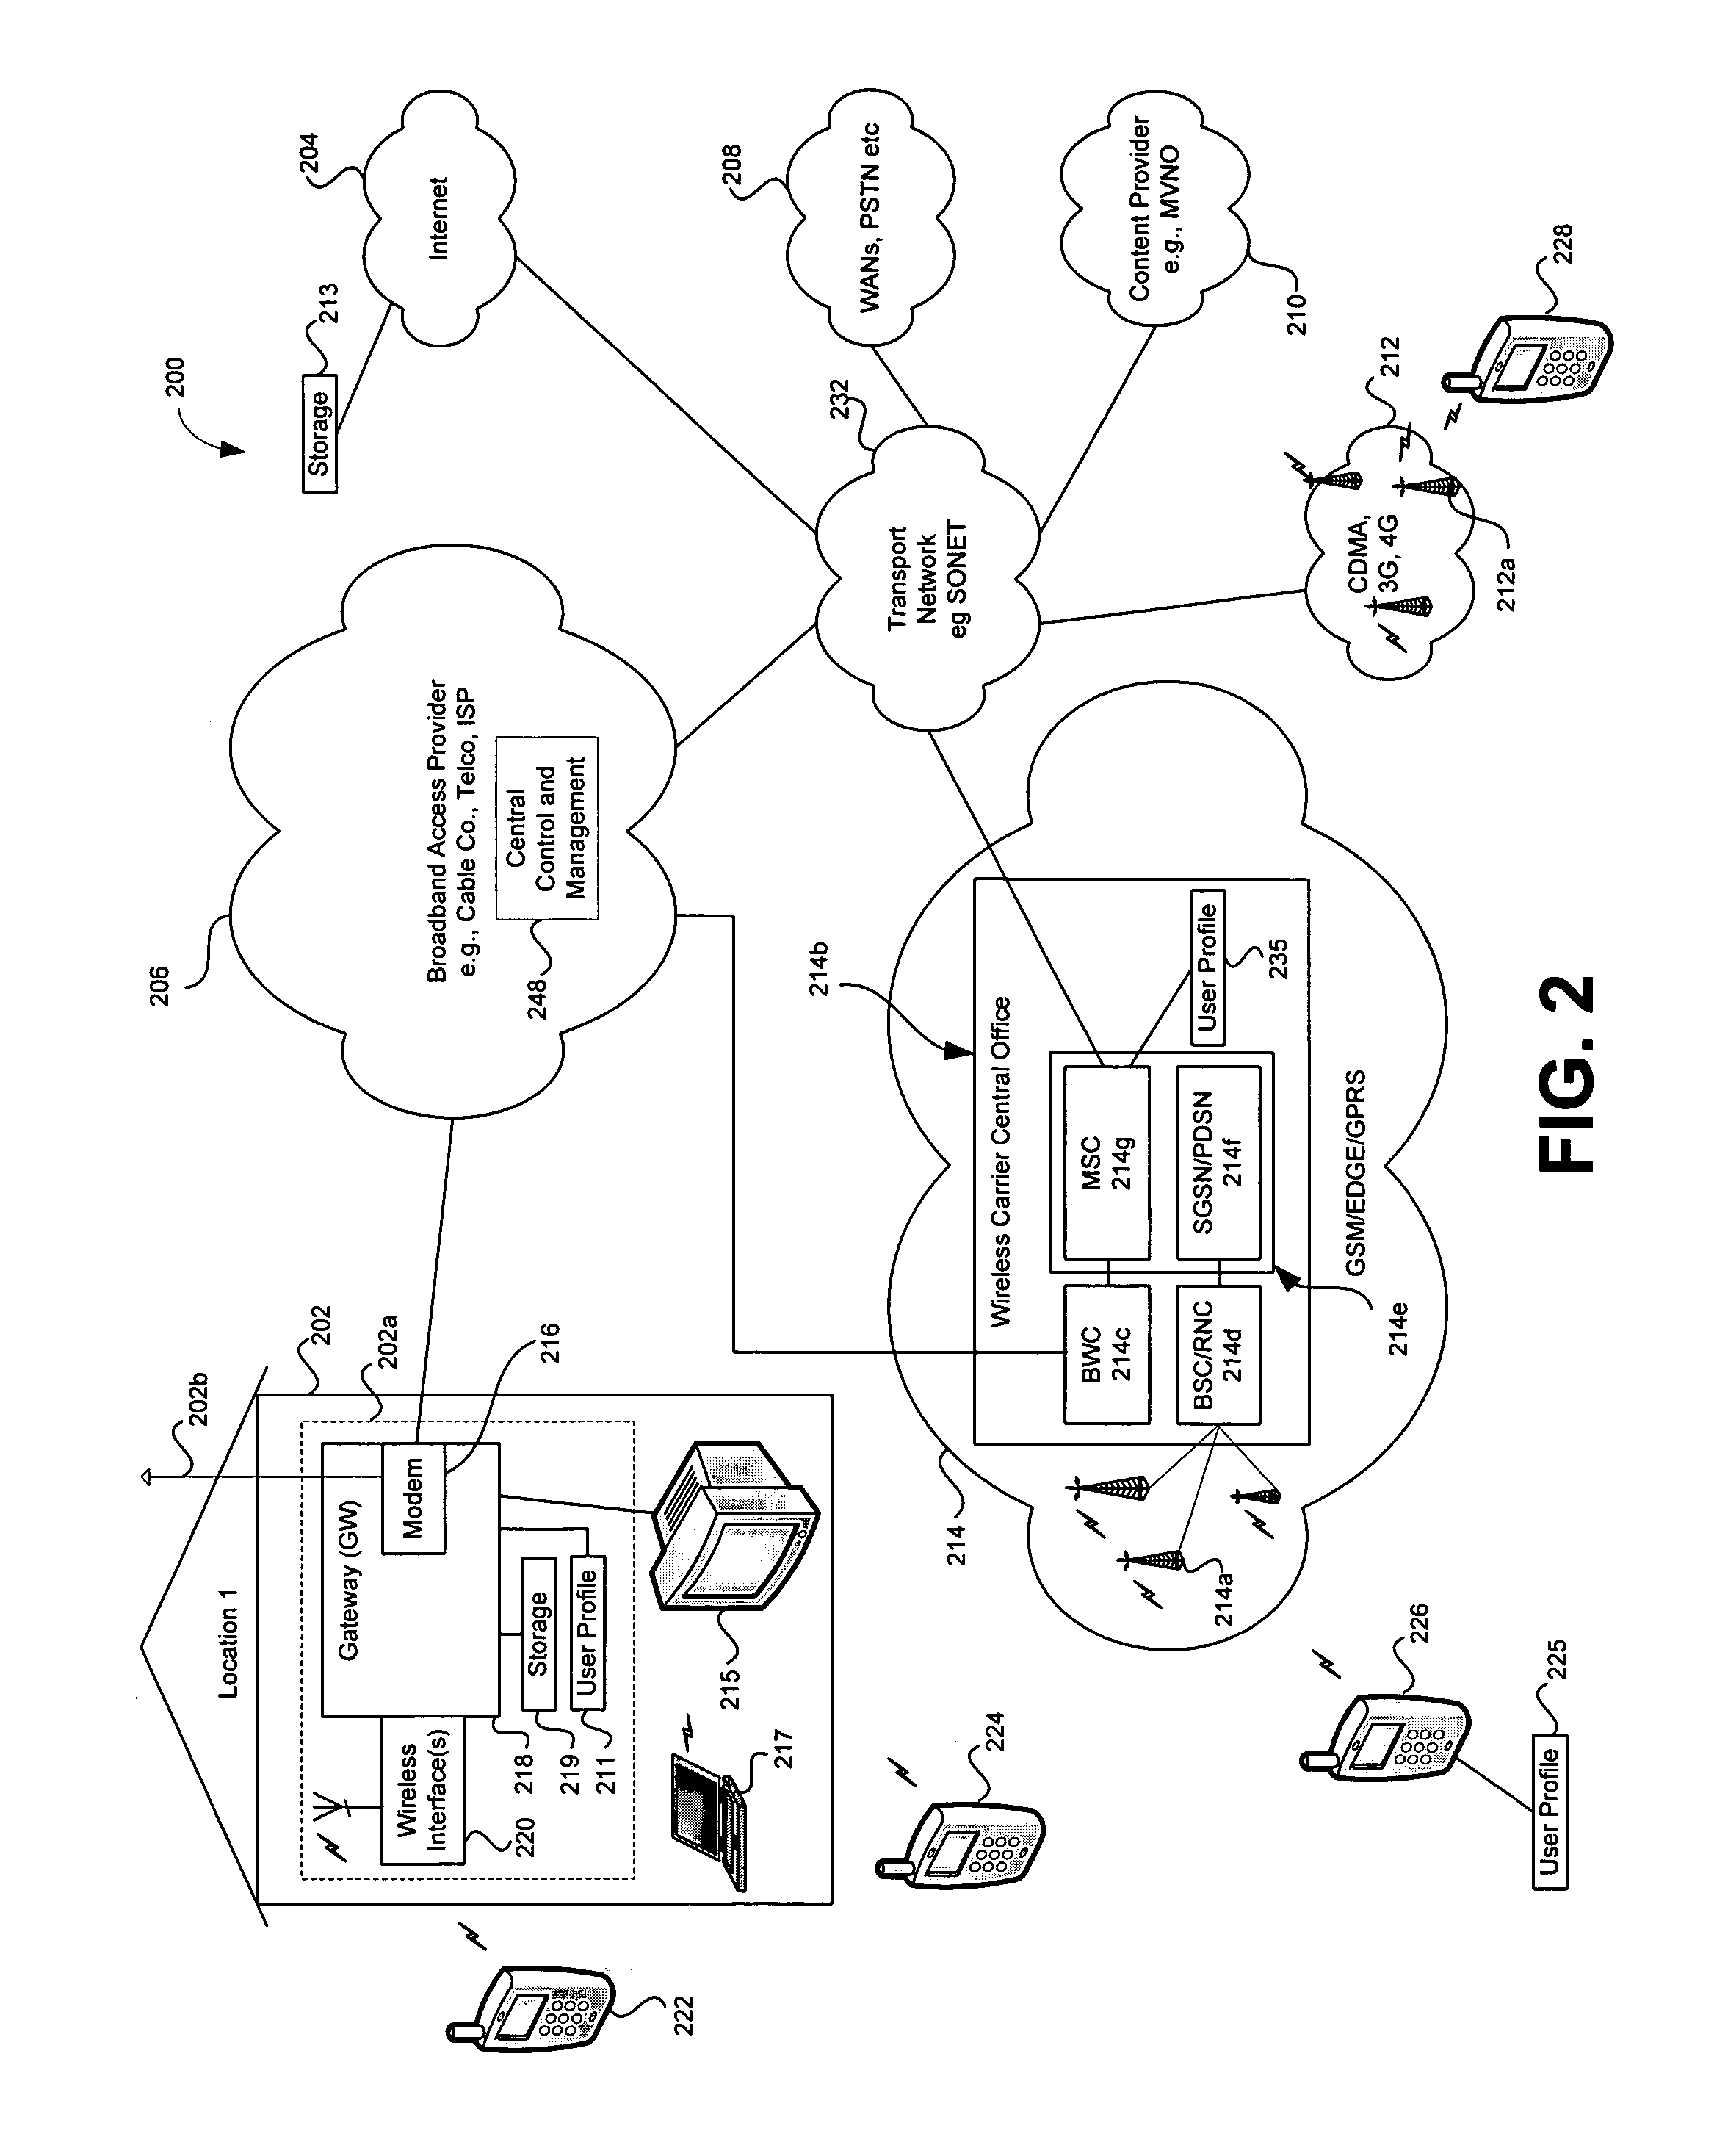 Handling of multimedia call sessions and attachments using multi-network simulcasting